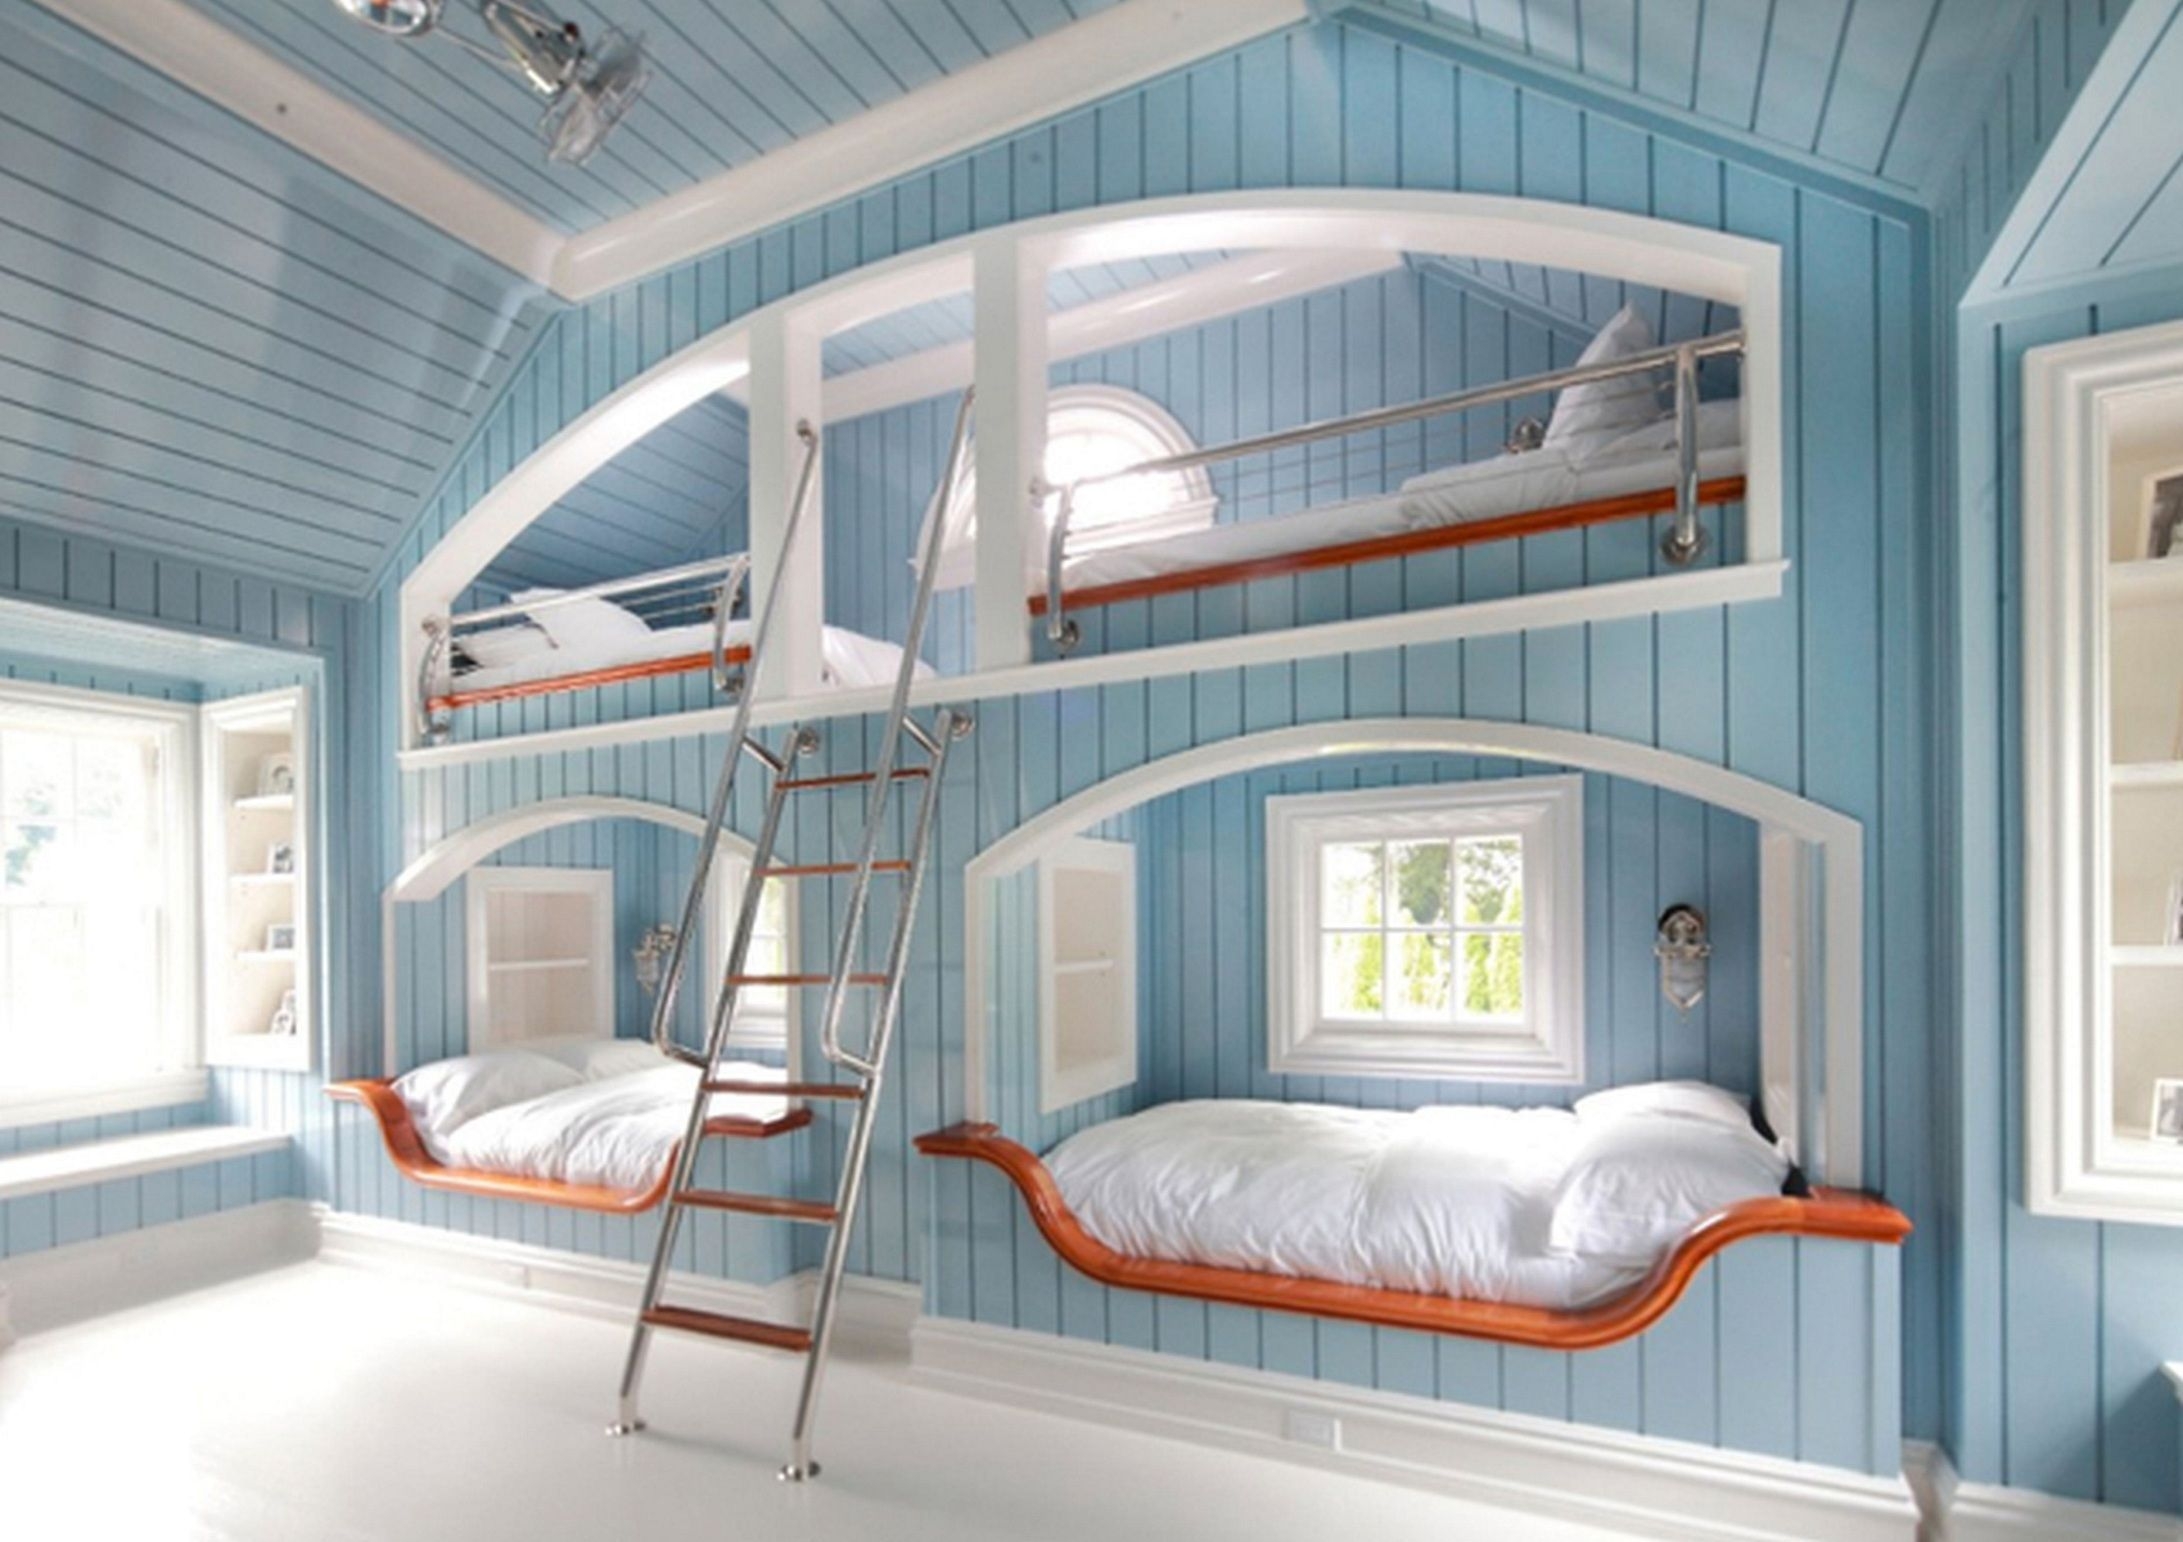 bunk beds for less